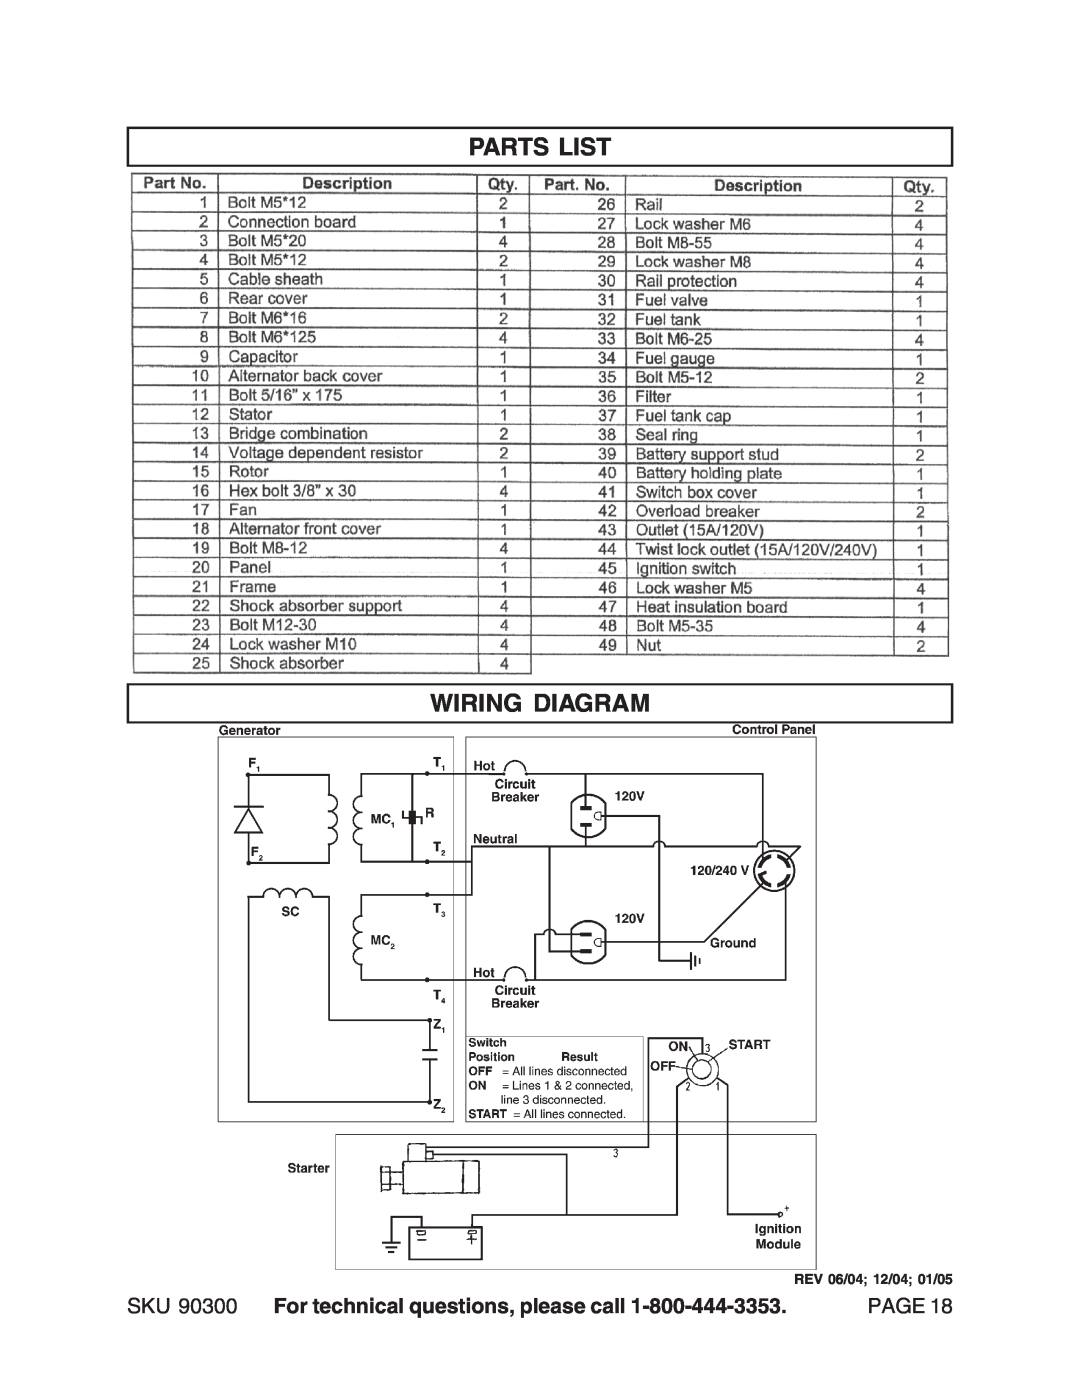 Chicago Electric Parts List Wiring Diagram, SKU 90300 For technical questions, please call, Page, REV 06/04 12/04 01/05 